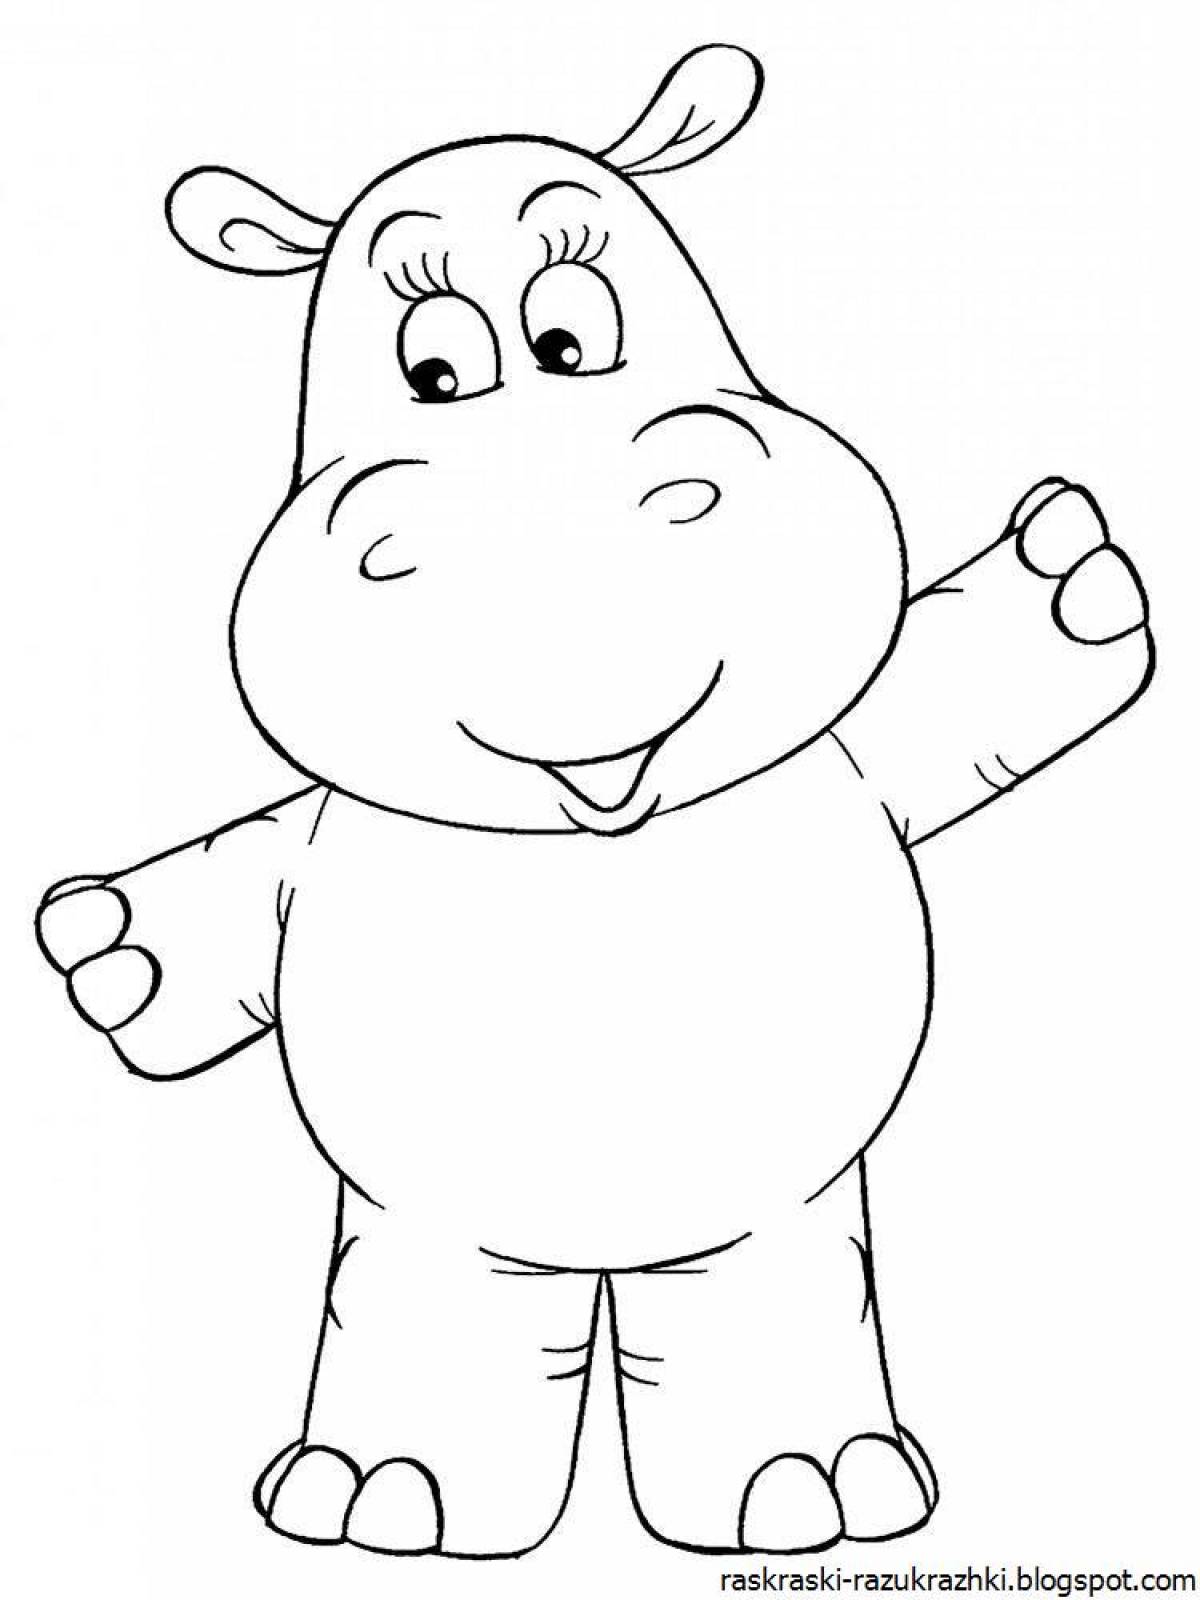 Gorgeous hippo coloring for kids